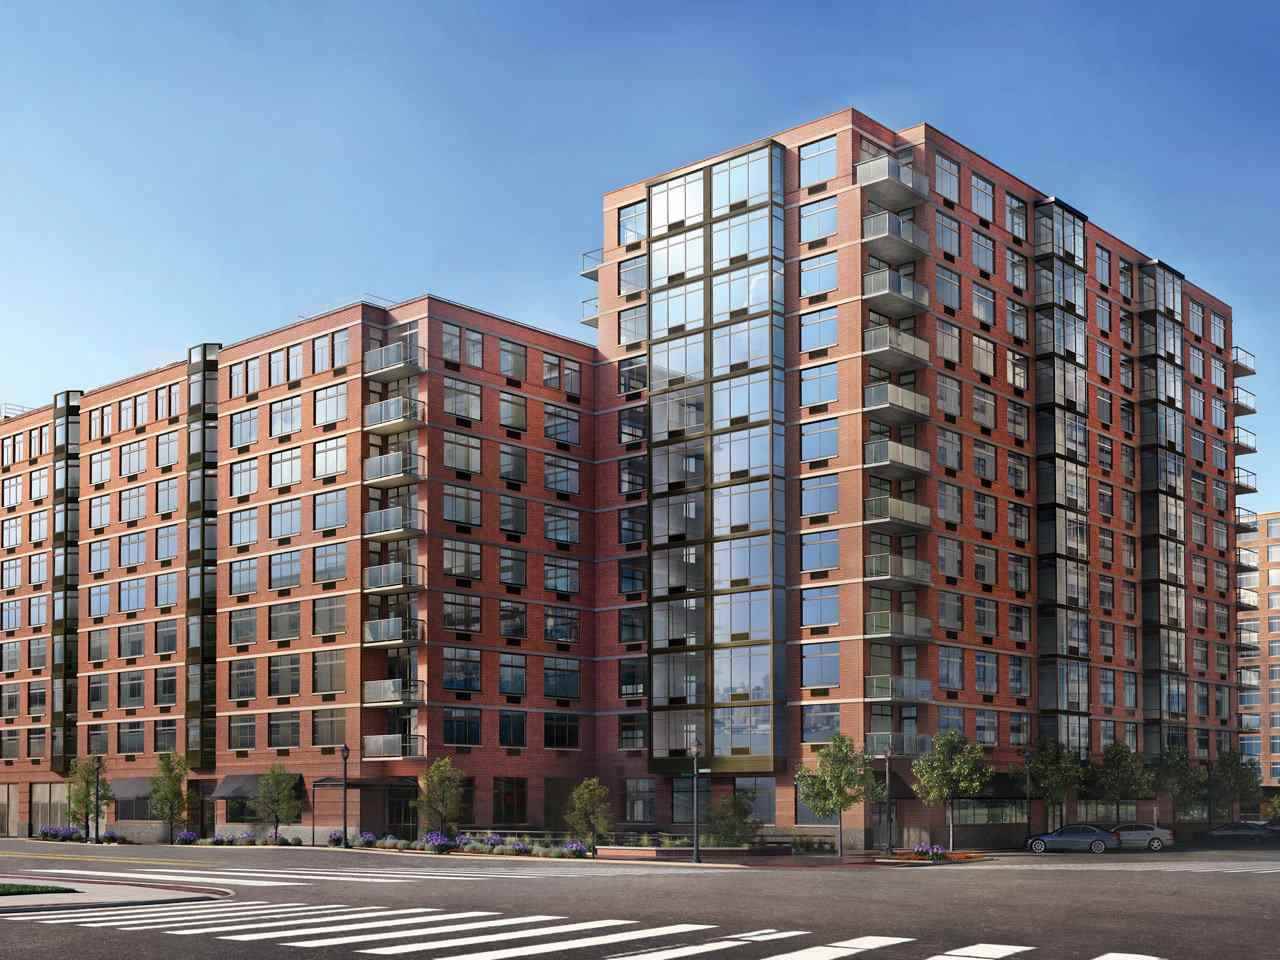 Be the first to live in this beautiful East-facing 763 sqft 1 BR/1BA condo in Hoboken’s newest luxury building